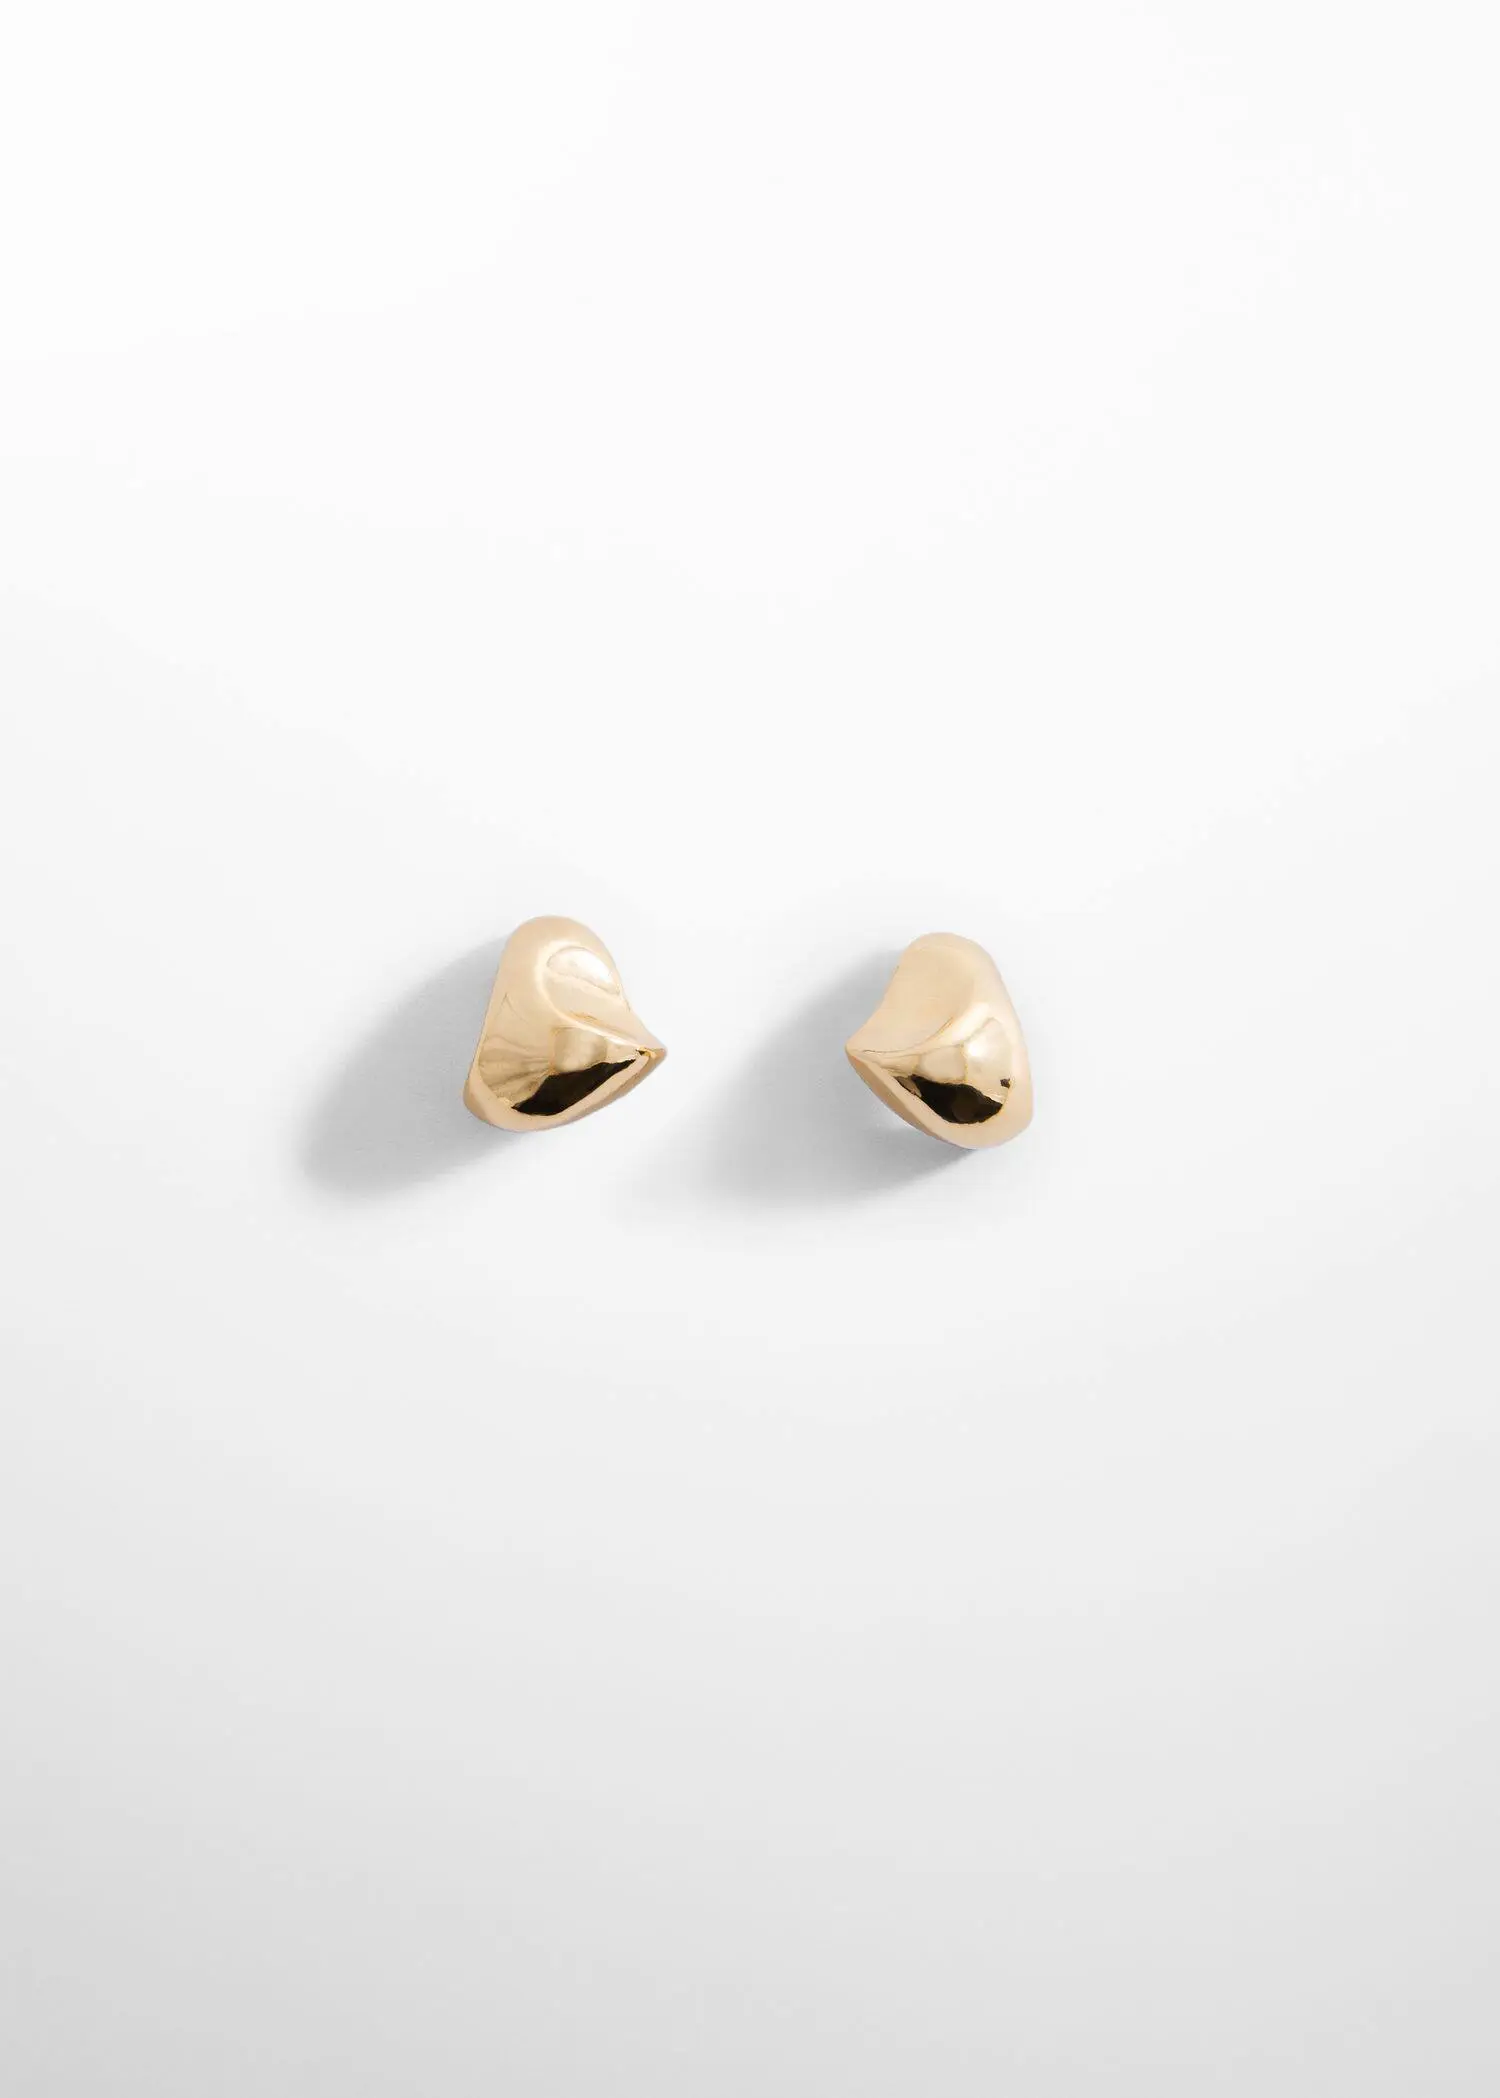 Mango Twisted earrings. a pair of gold heart shaped earrings sitting on top of a white surface. 